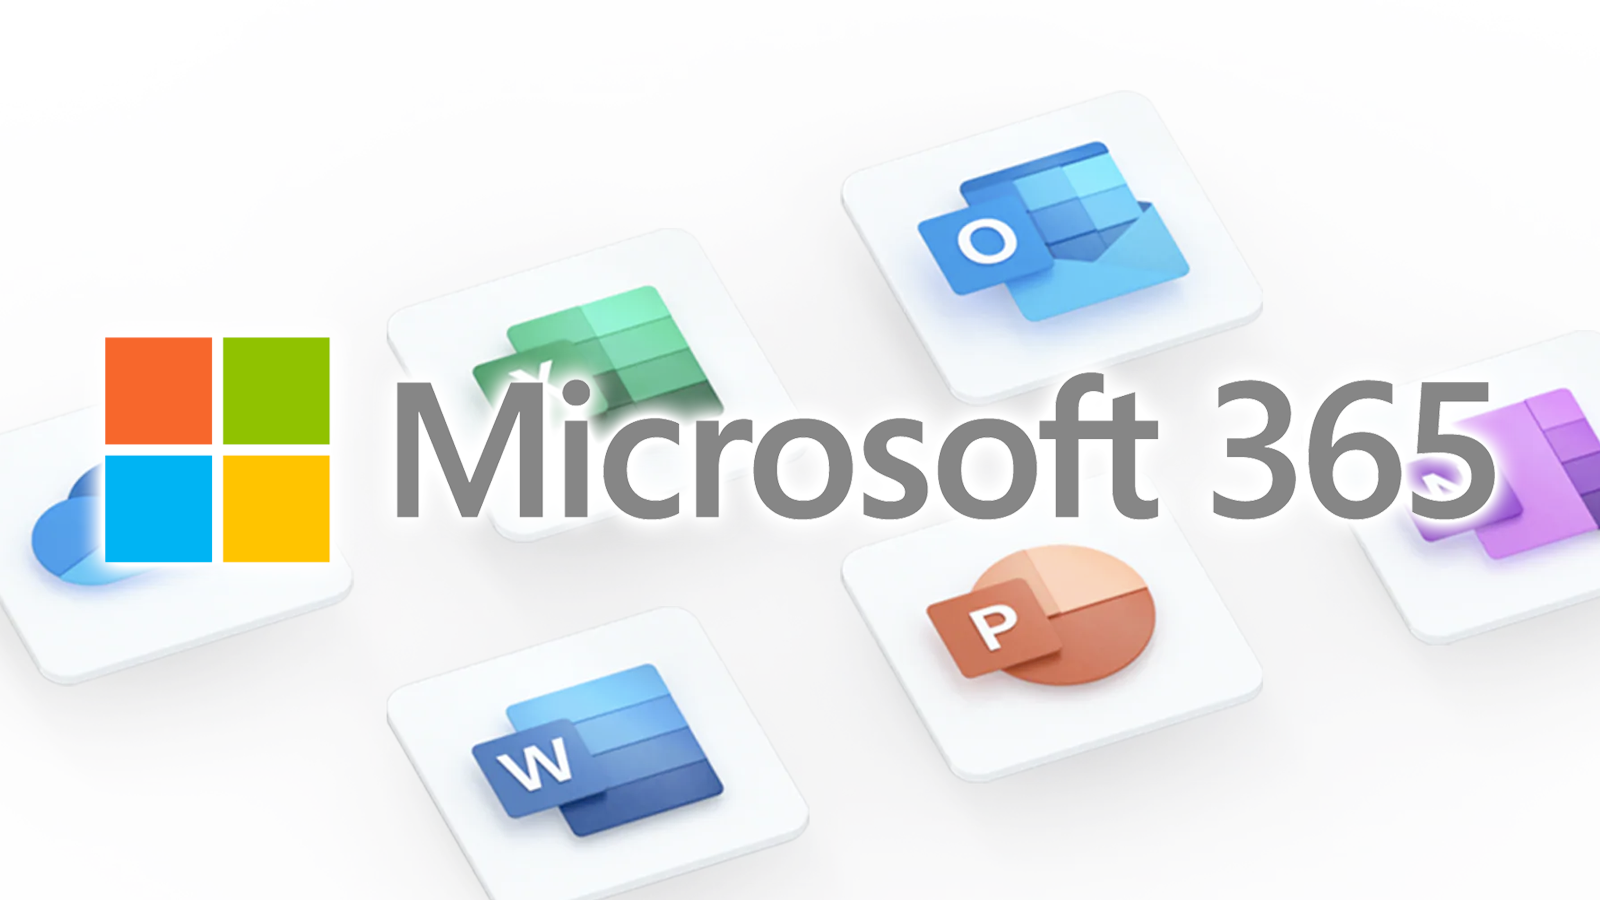 The Microsoft 365 logo over a white background.